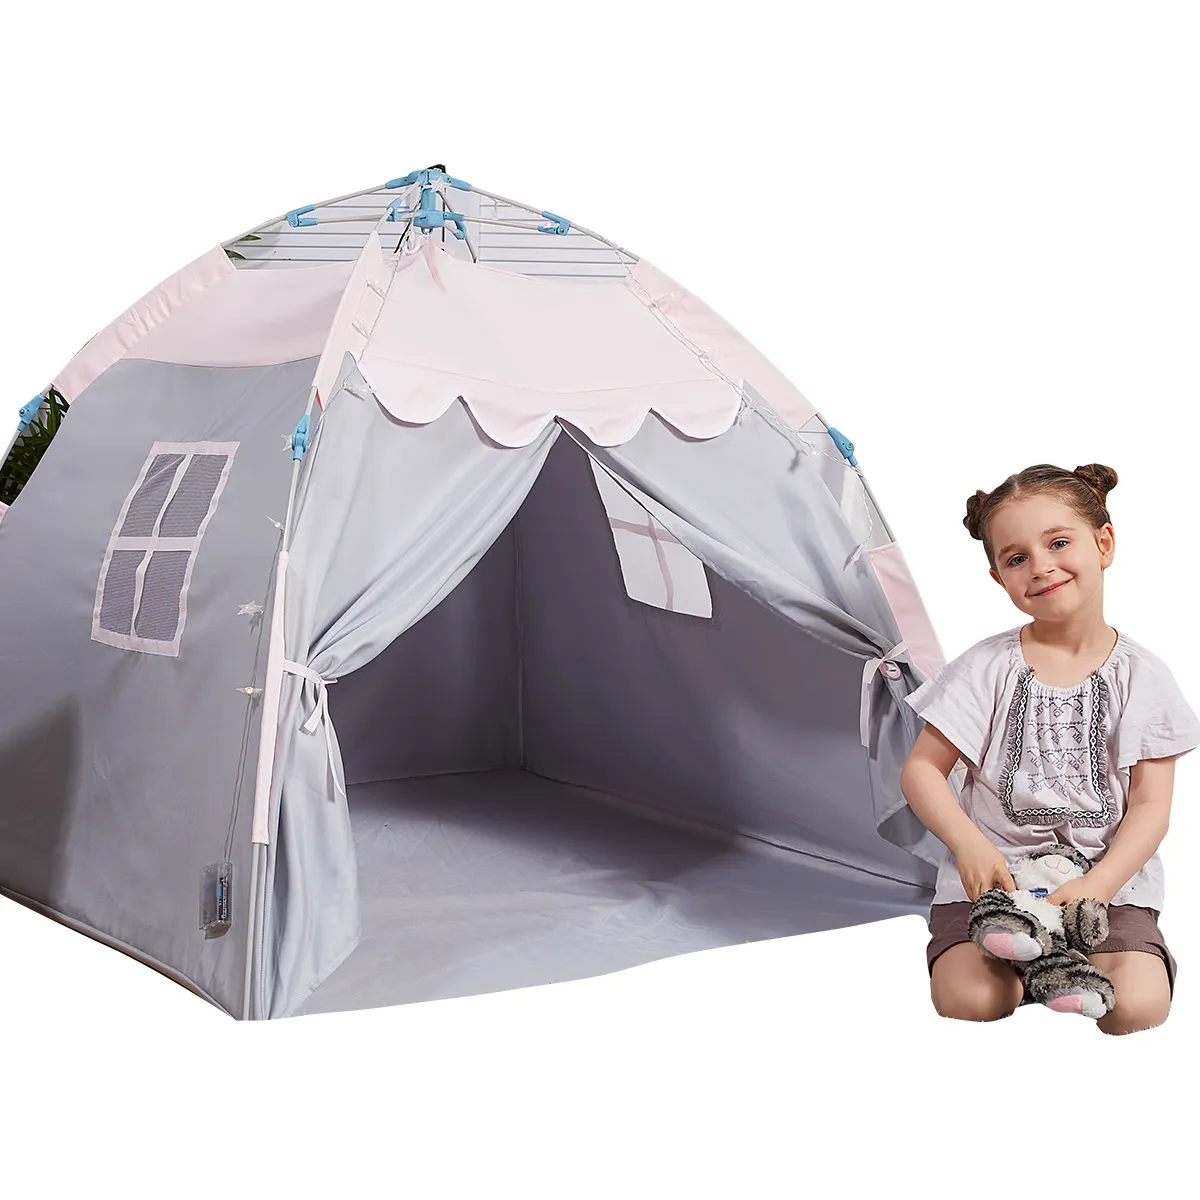 Grey automatic children's tent toys are easy to store andkids tunnels andplay tents for girls age 4-7 indoor